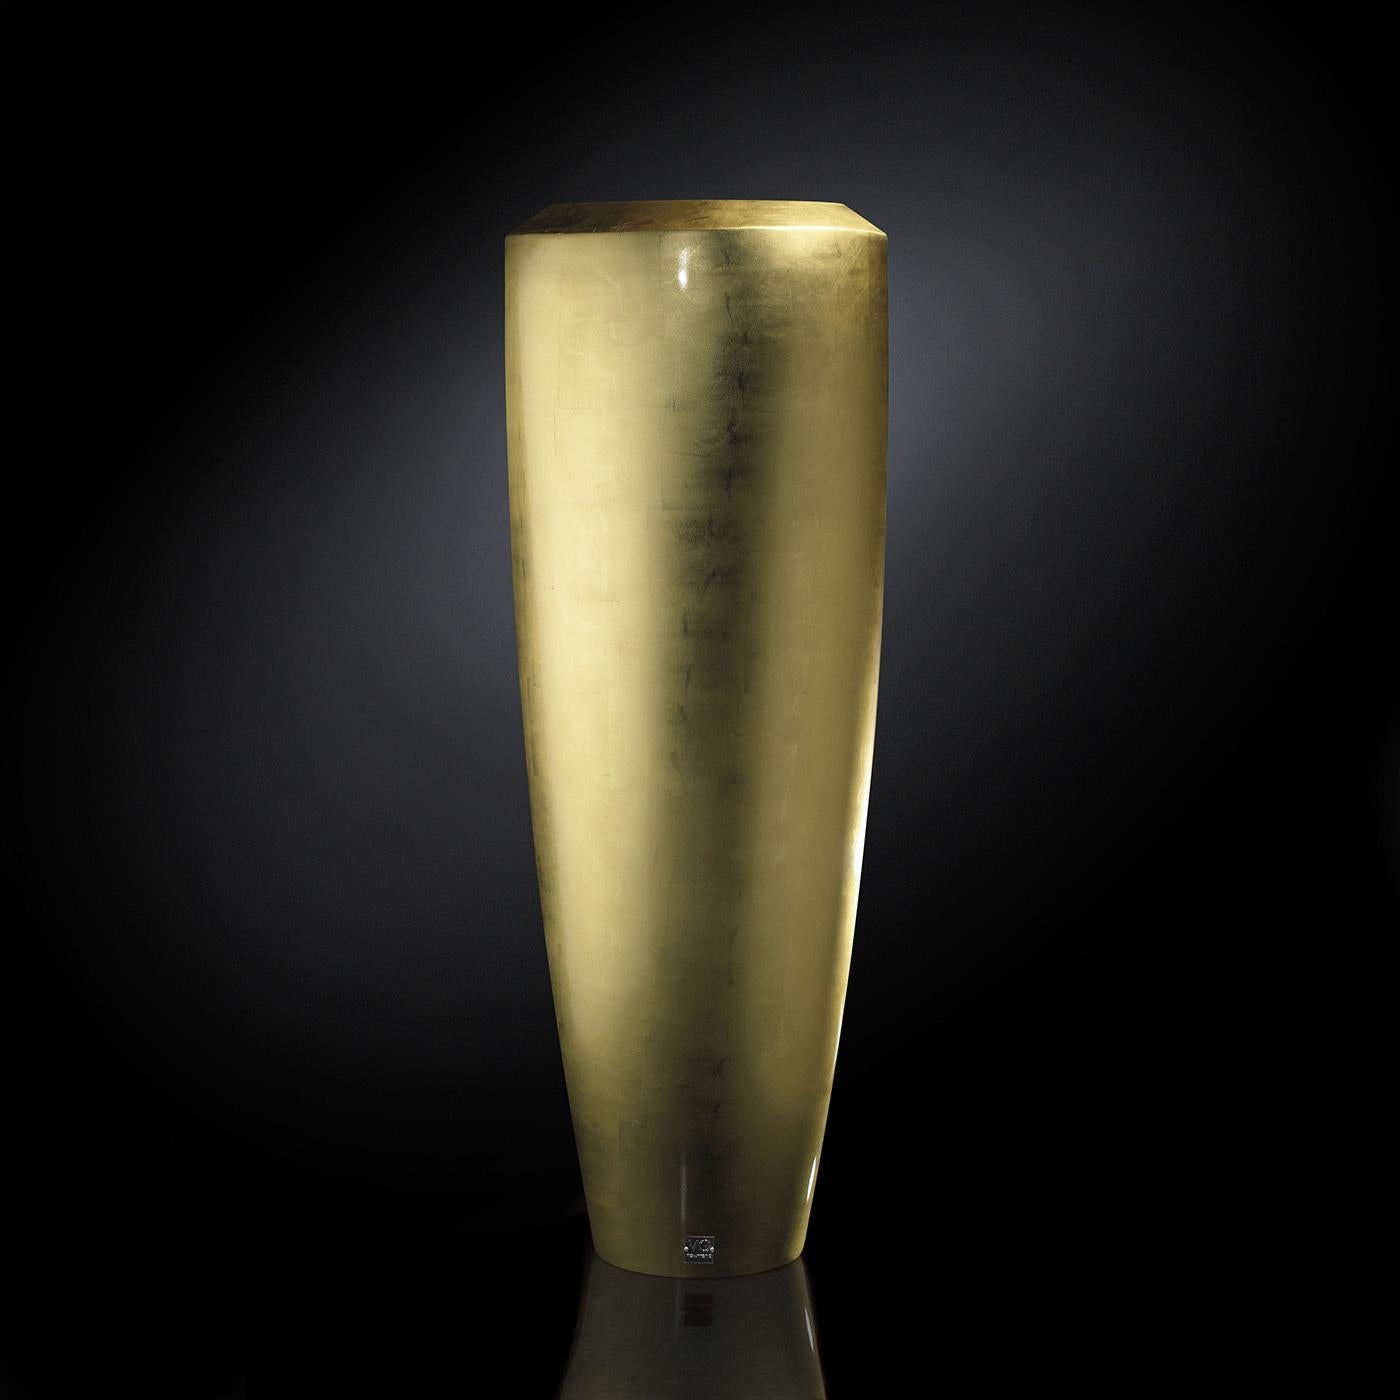 Marked by elegant golden hues, this opulent vase will add a refined accent to a contemporary interior. Crafted of LDPE (low-density polyethylene) enriched with gold leaf.
 